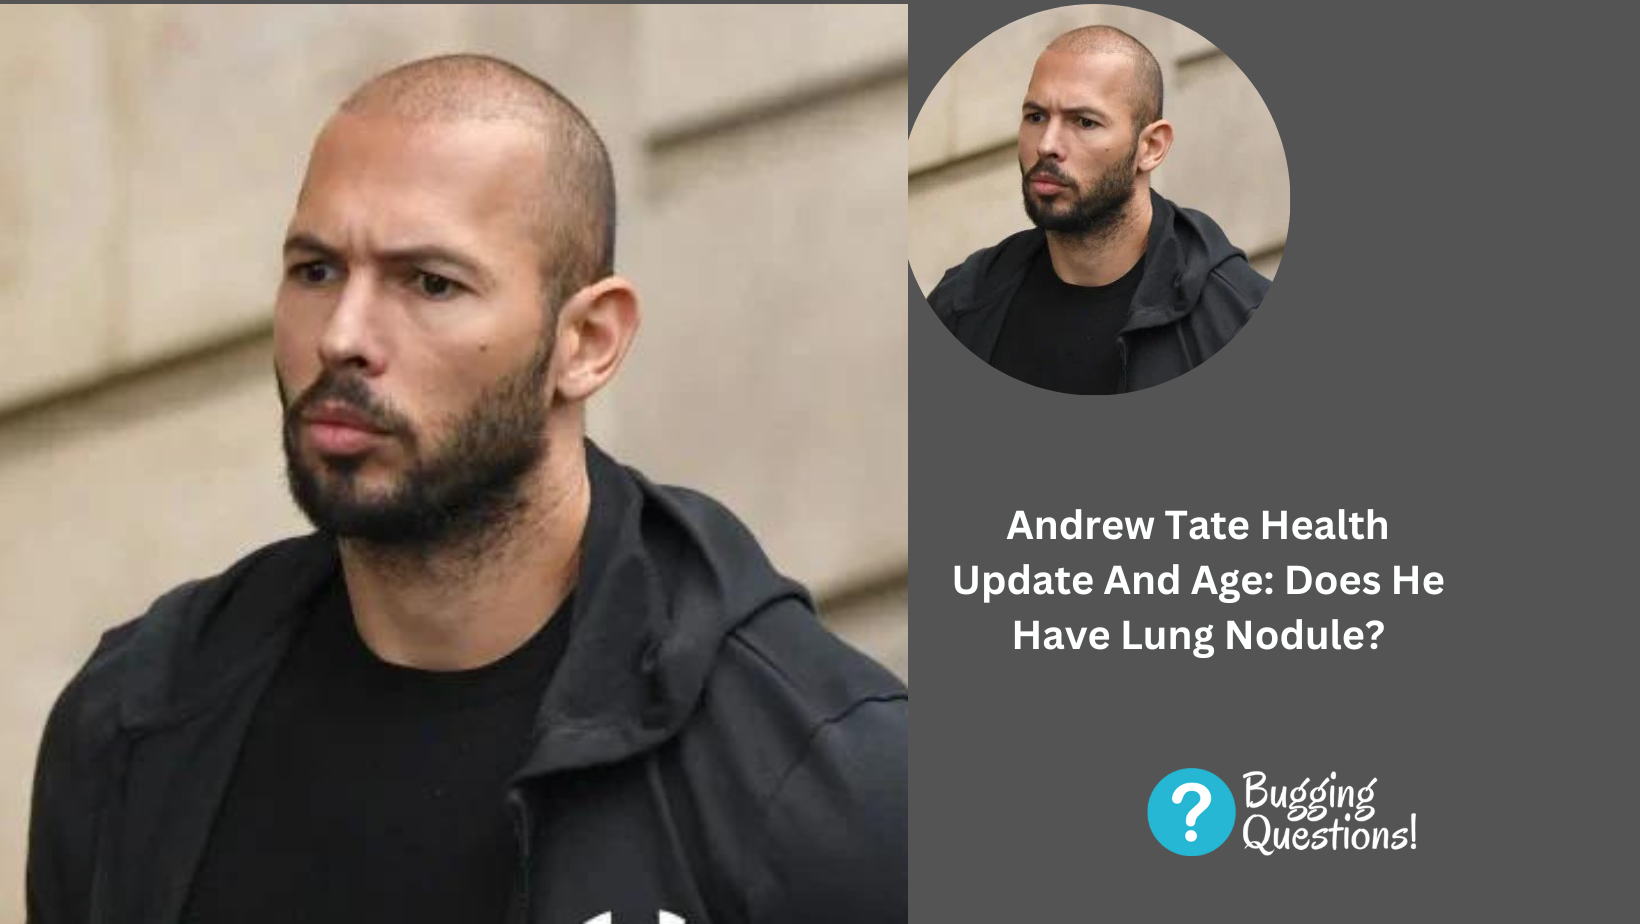 Andrew Tate Health Update And Age: Does He Have Lung Nodule?